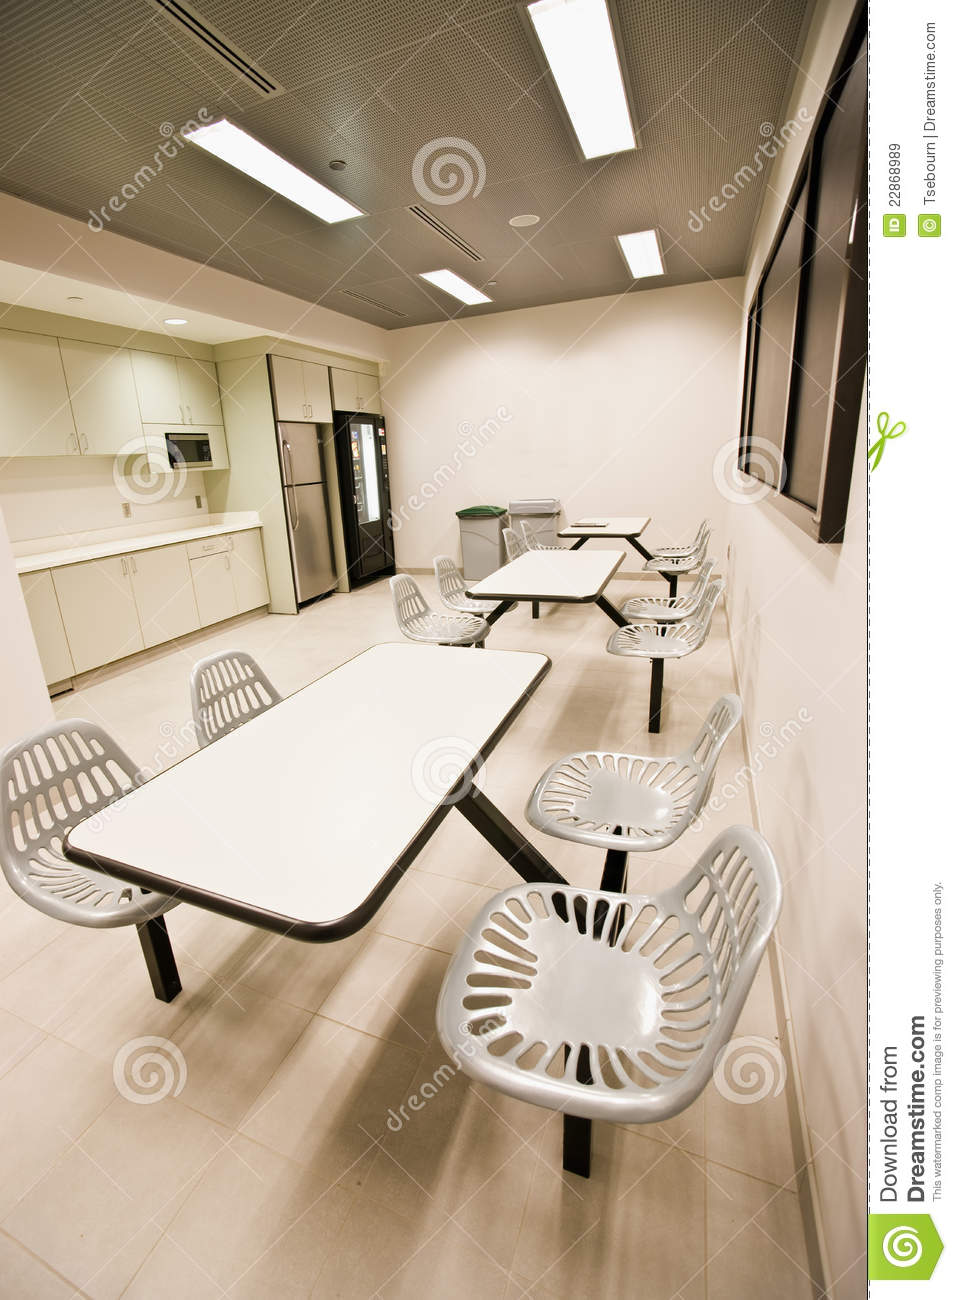 Office Break Room Royalty Free Stock Images   Image  22868989